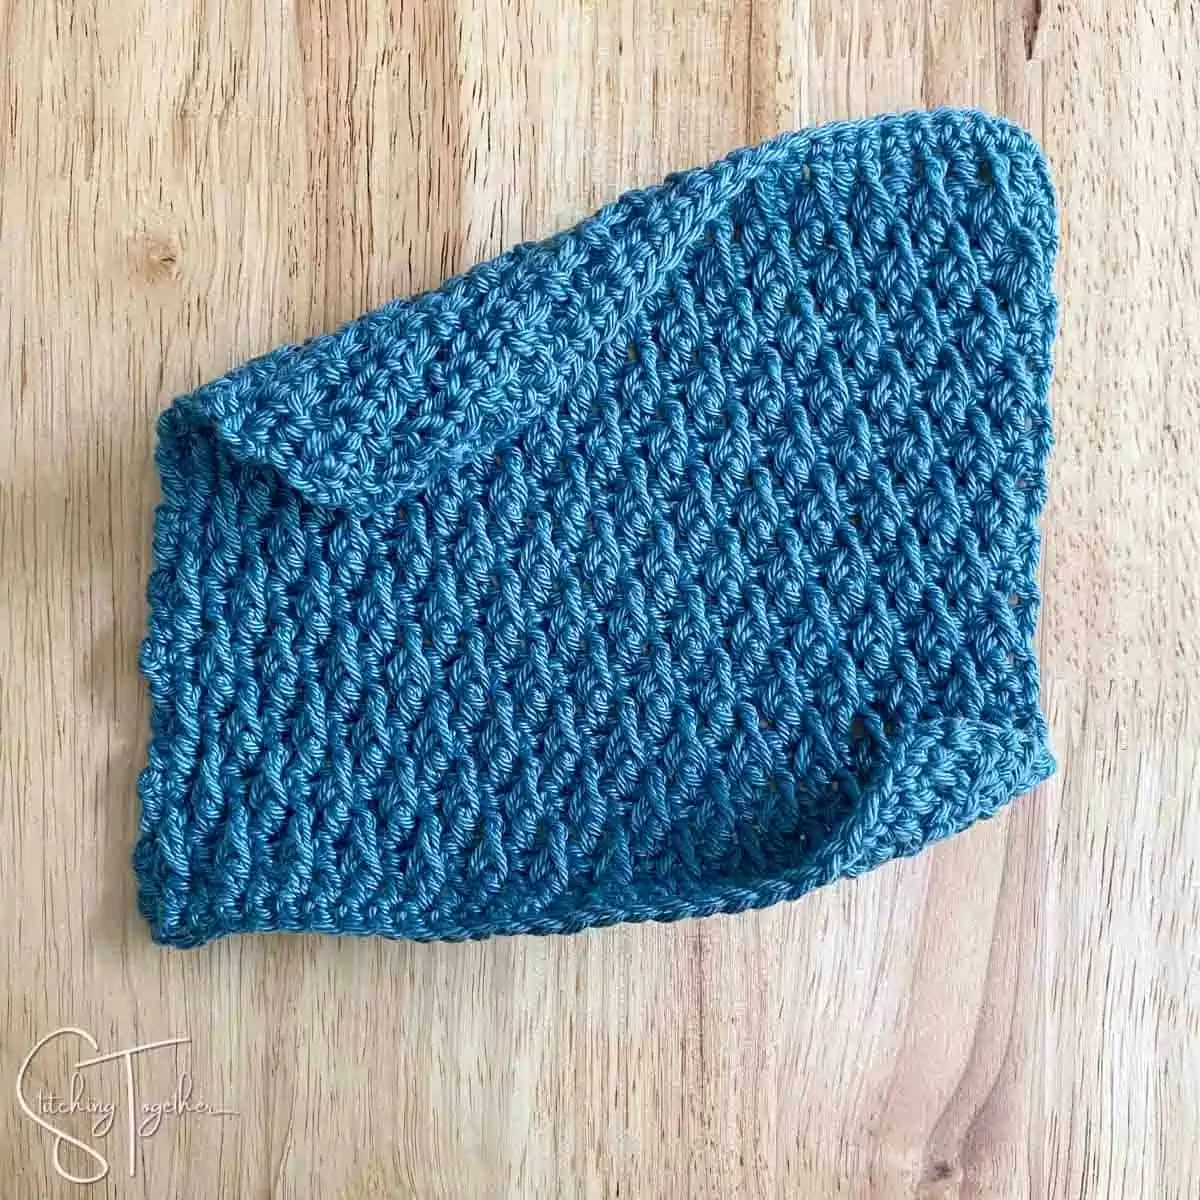 crochet swatch with curled edges before blocking